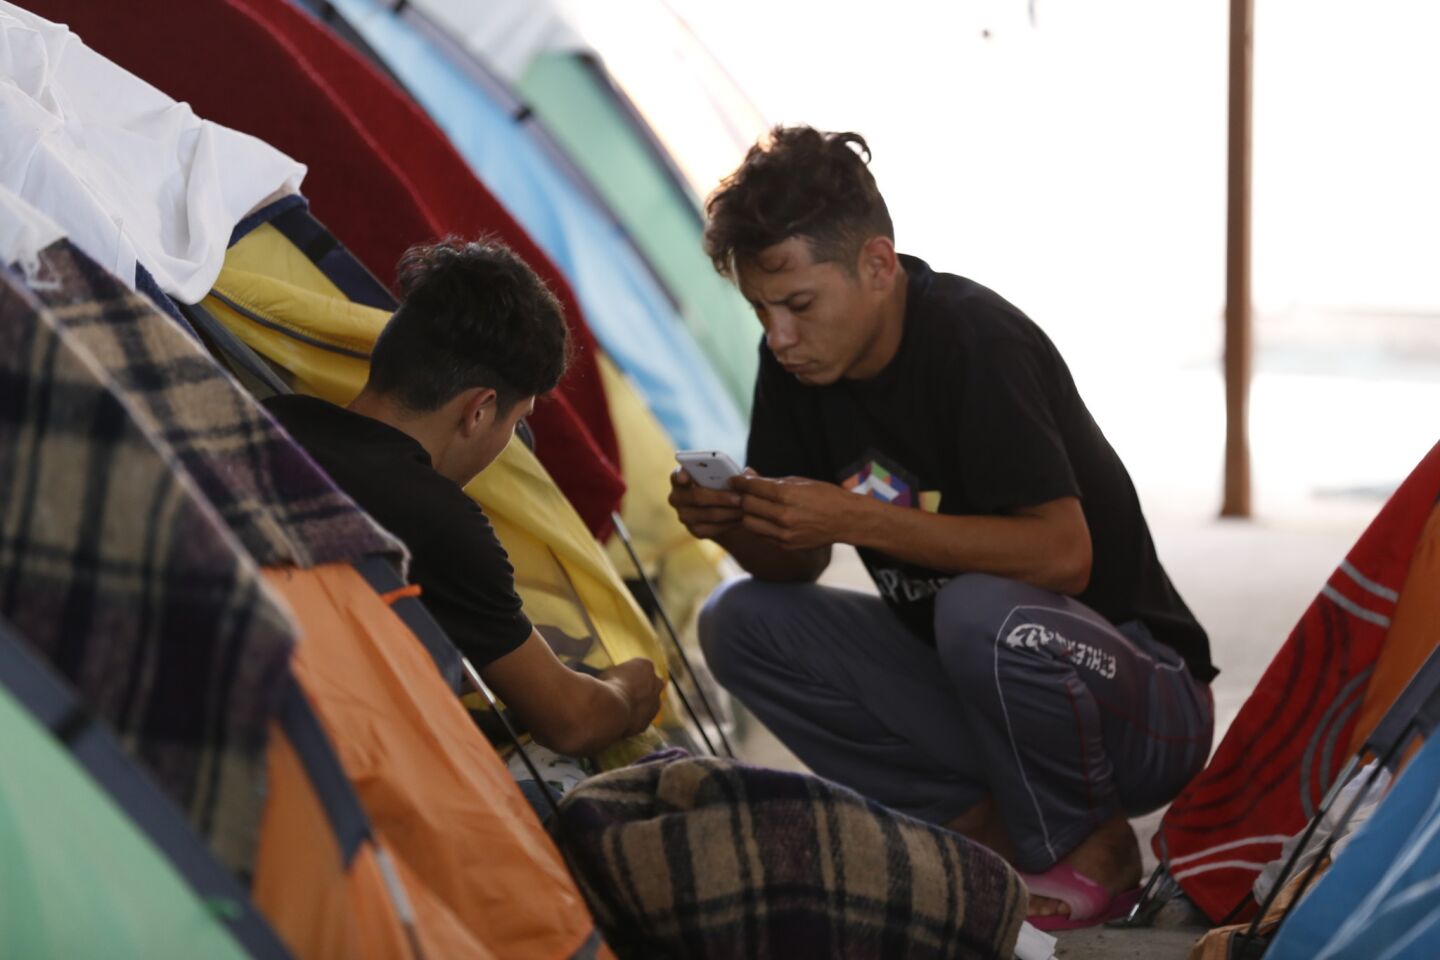 Asylum seekers from Mexico and Central America arrive in Tijuana